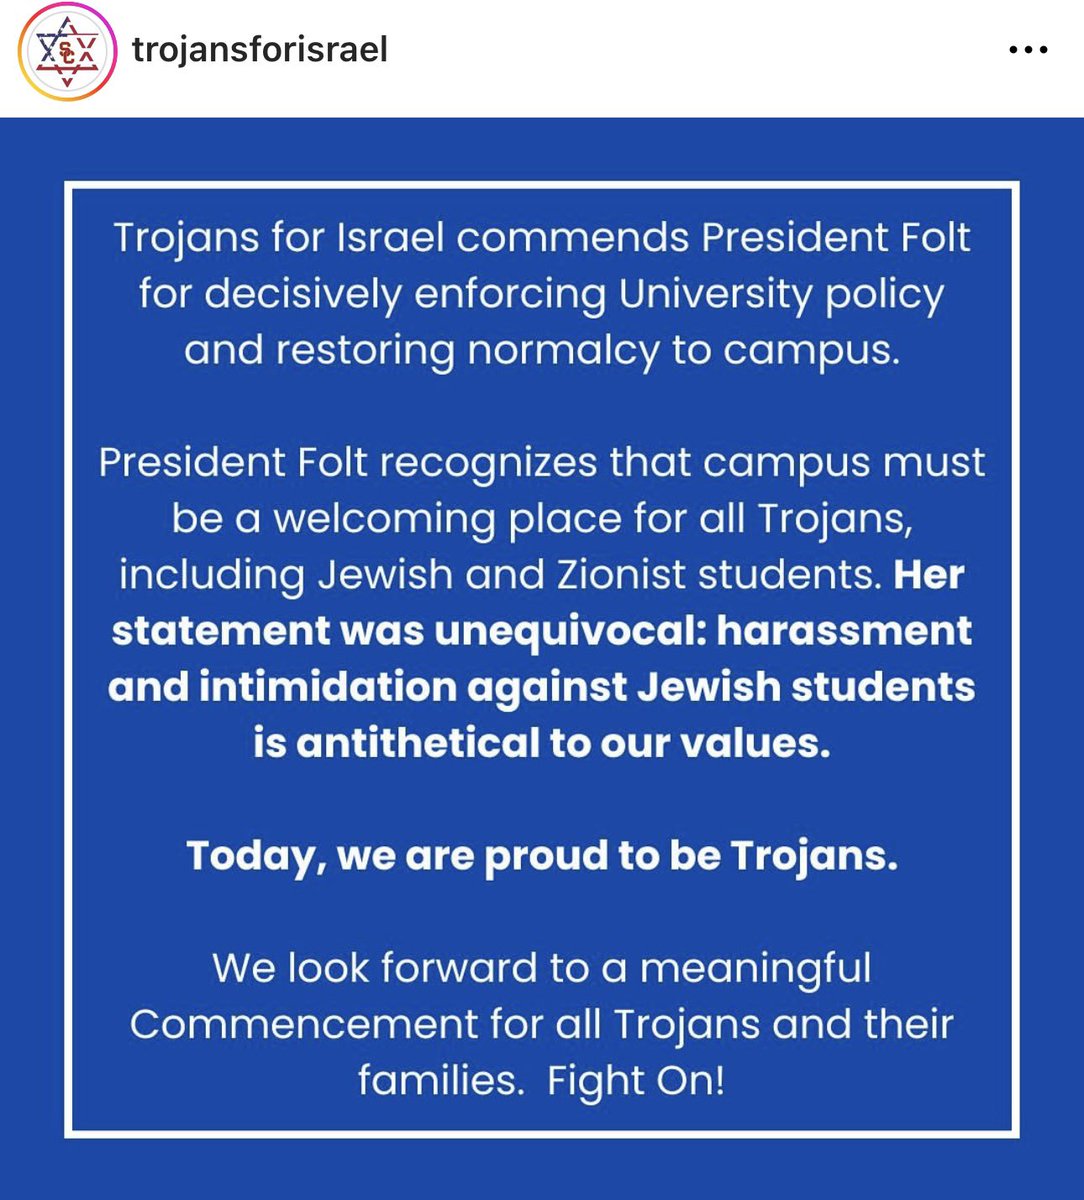 NEW: Trojans for Israel praises USC’s @PresidentFolt for dispersing the encampment “Her statement was unequivocal: harassment and intimidation against Jewish students is antithetical to our values.”